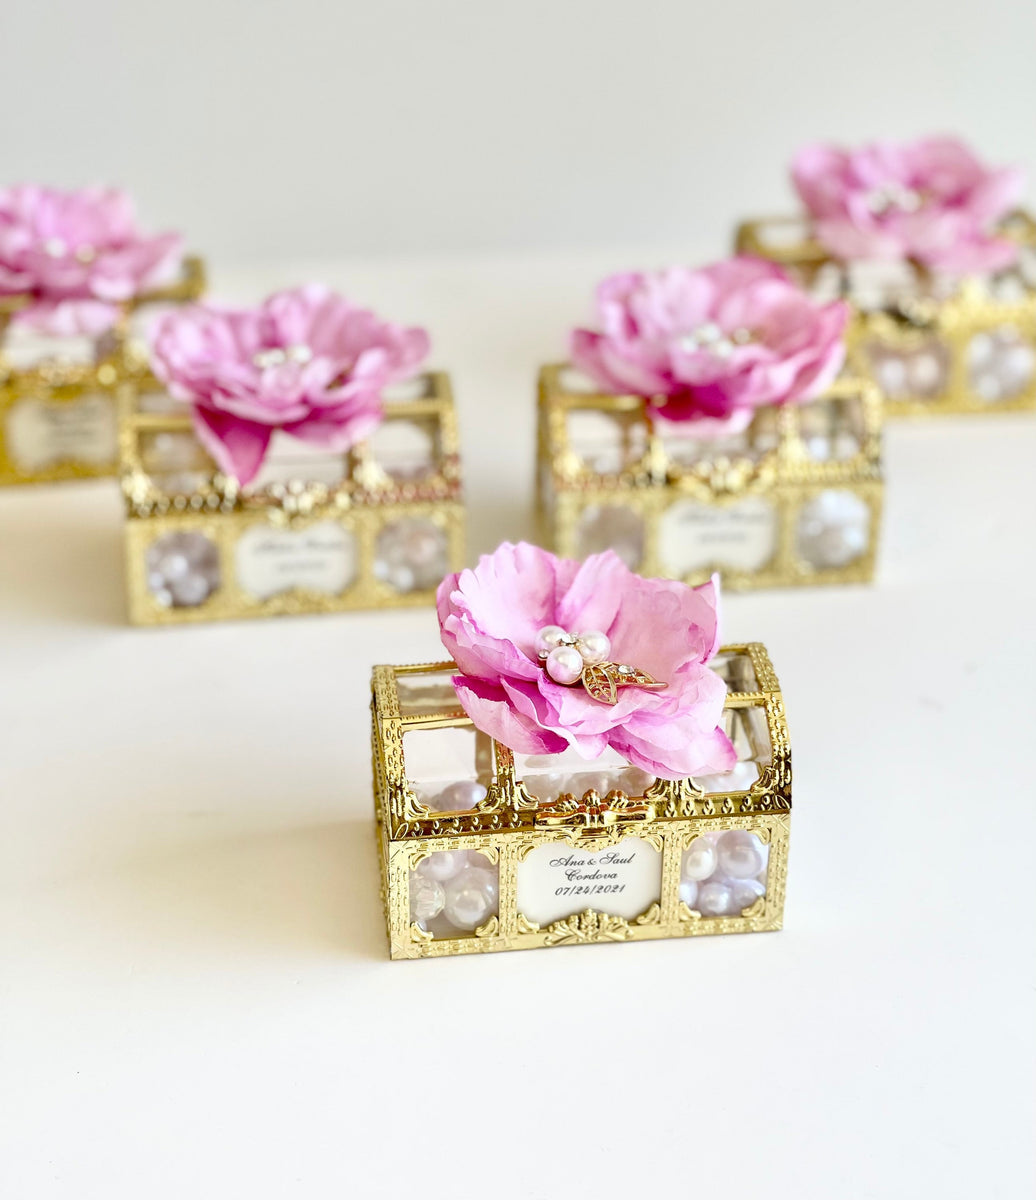 5 Pcs Wedding Favors, Favors, Favors Boxes, Wedding Favors for Guests, Nude  Wedding, Party Favors, Blush Wedding, Custom Favors, Sweet 16 -  Canada